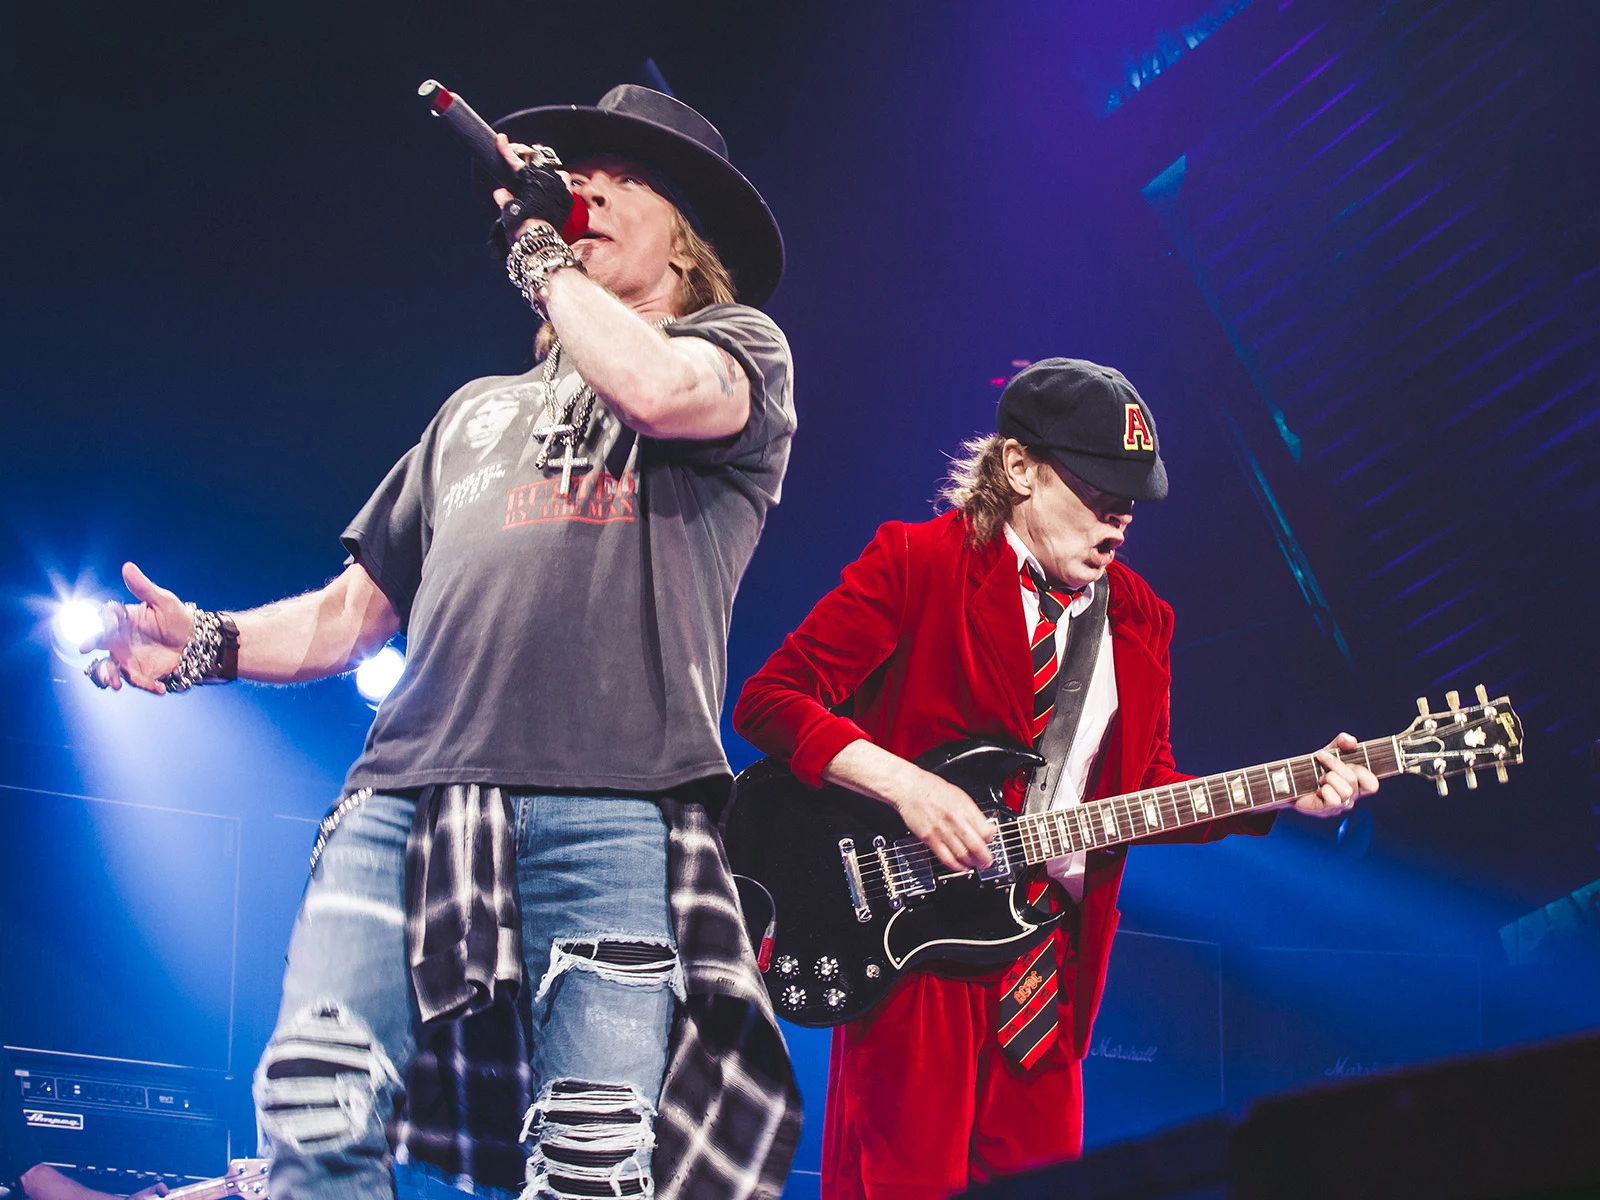 har en finger i kagen Automatisering mad AC/DC with Axl Rose @ MSG (pics & setlist)